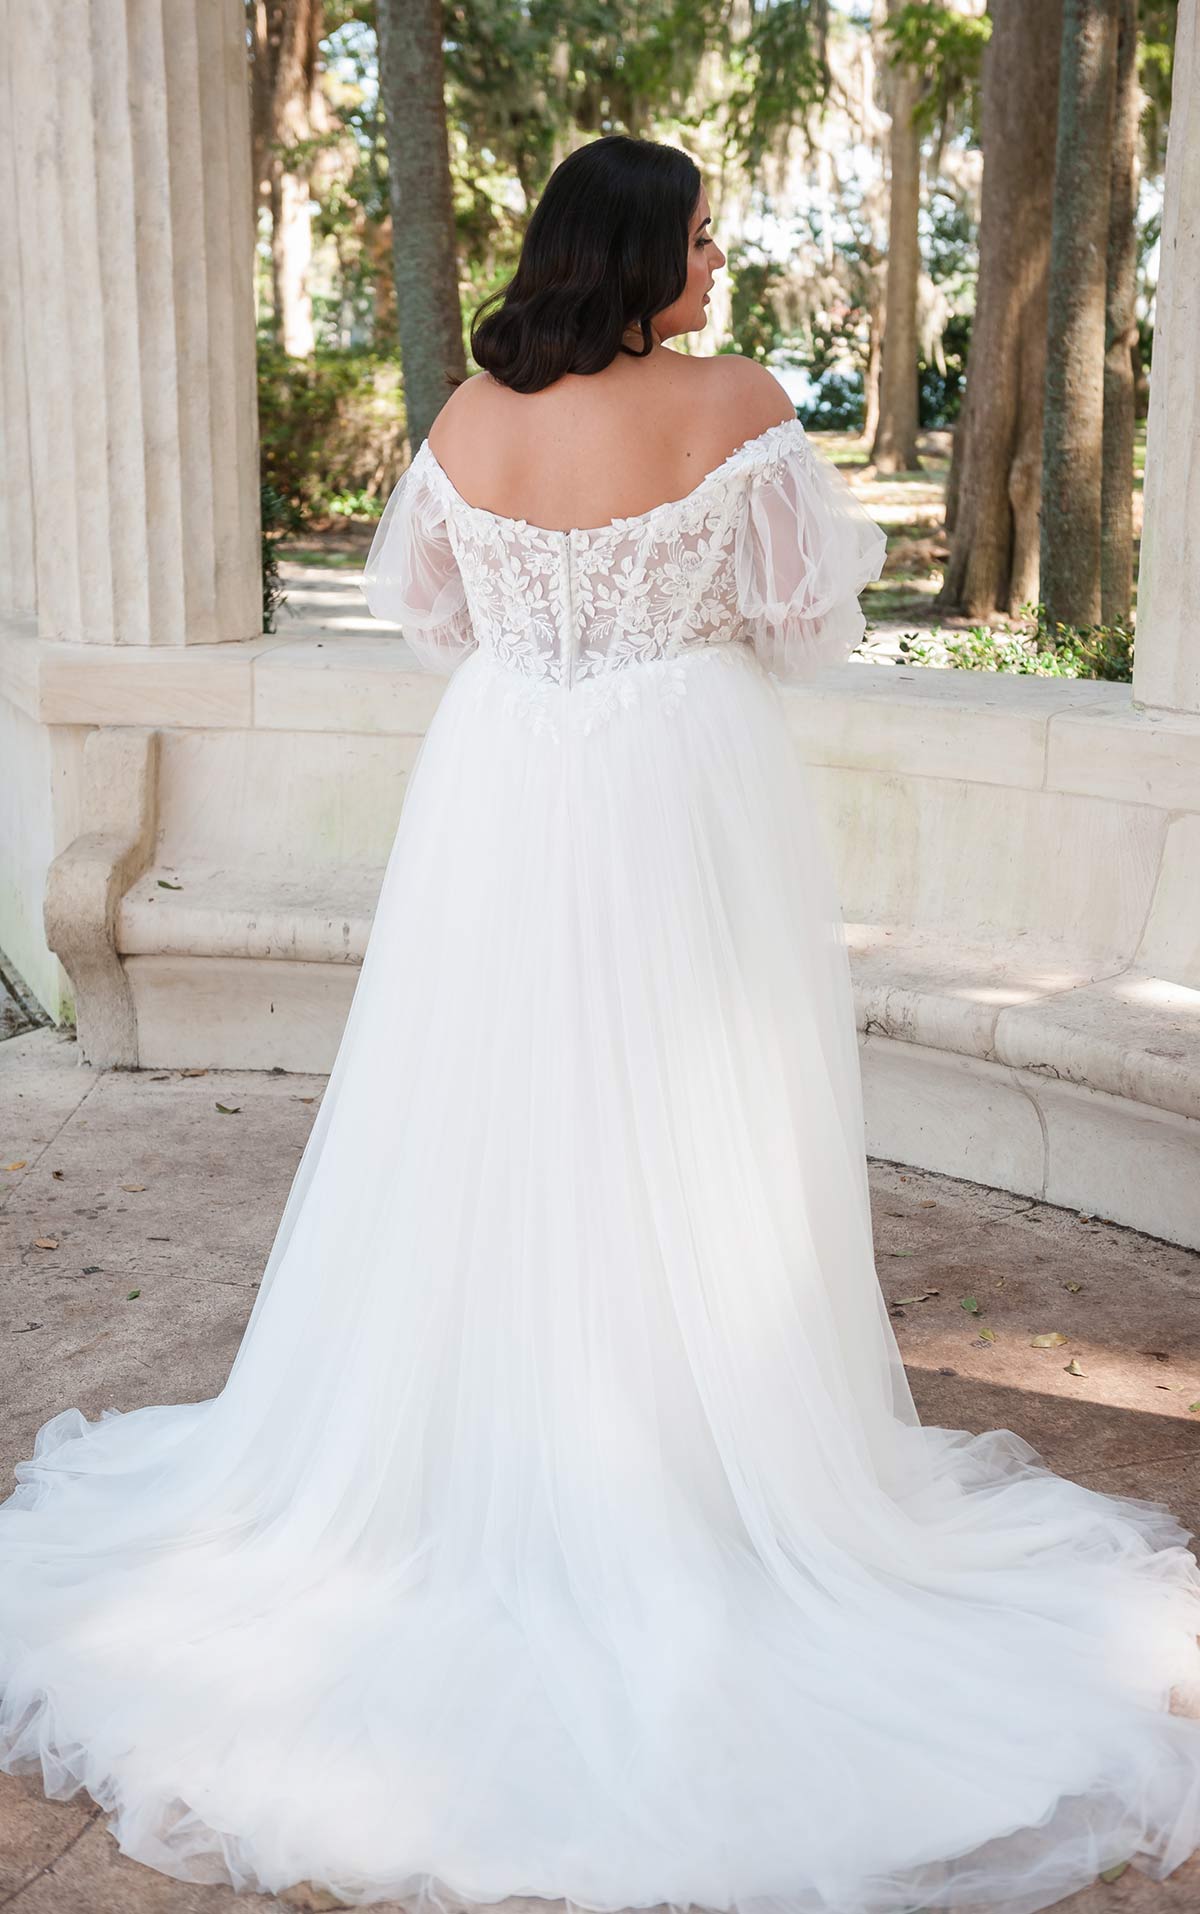 Romantic Lace Wedding Dress with Off-the-Shoulder Long Sleeves - Stella  York Wedding Dresses